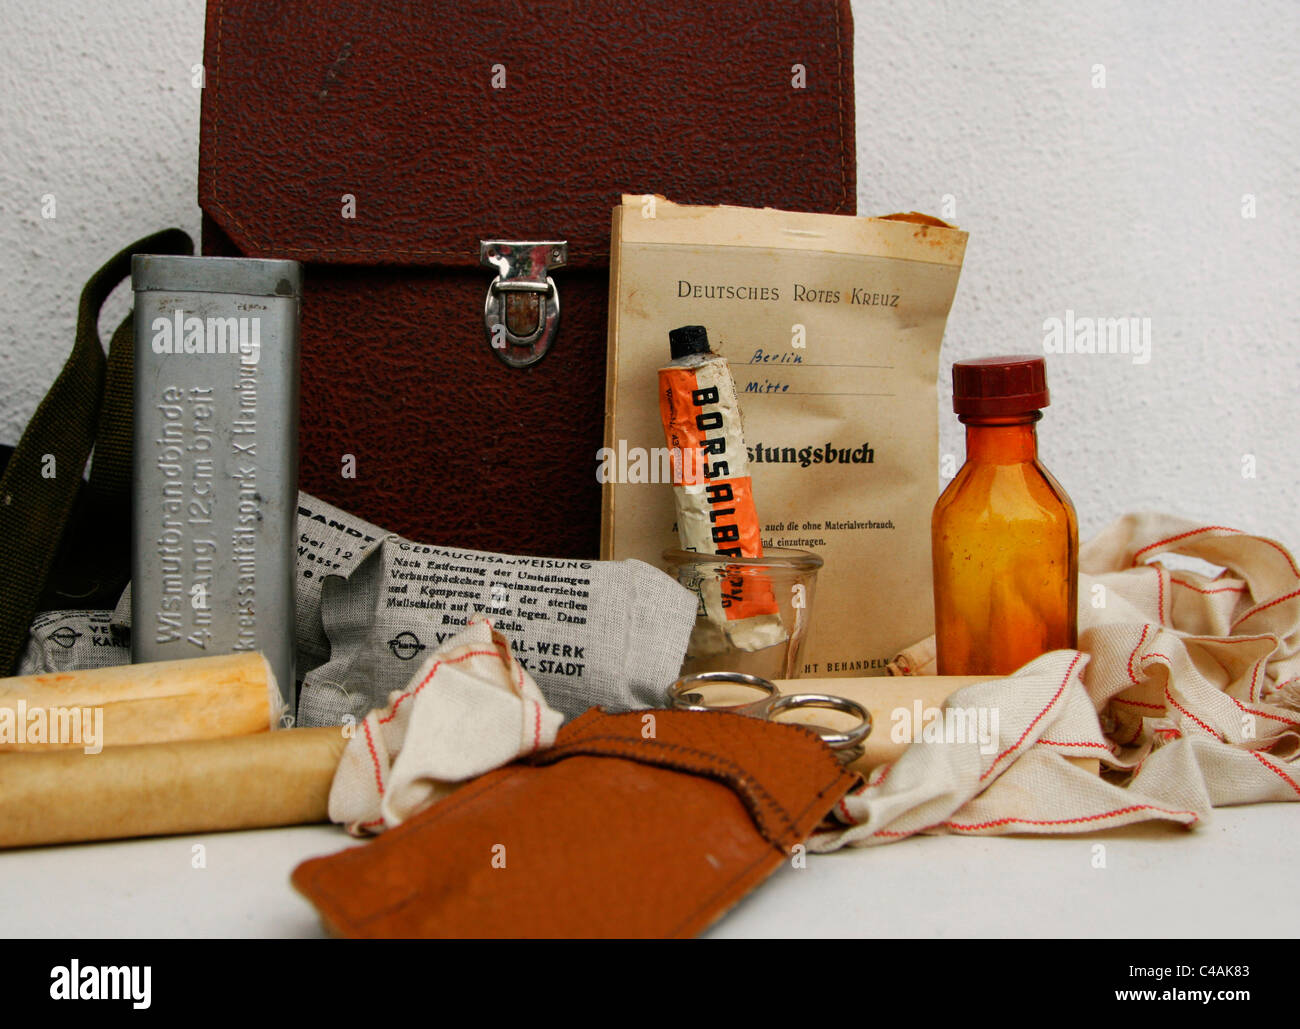 An historical German first aid kit with different tools like compresses,bandages,salve,a notebook of the 'German Red Cross' etc. Stock Photo